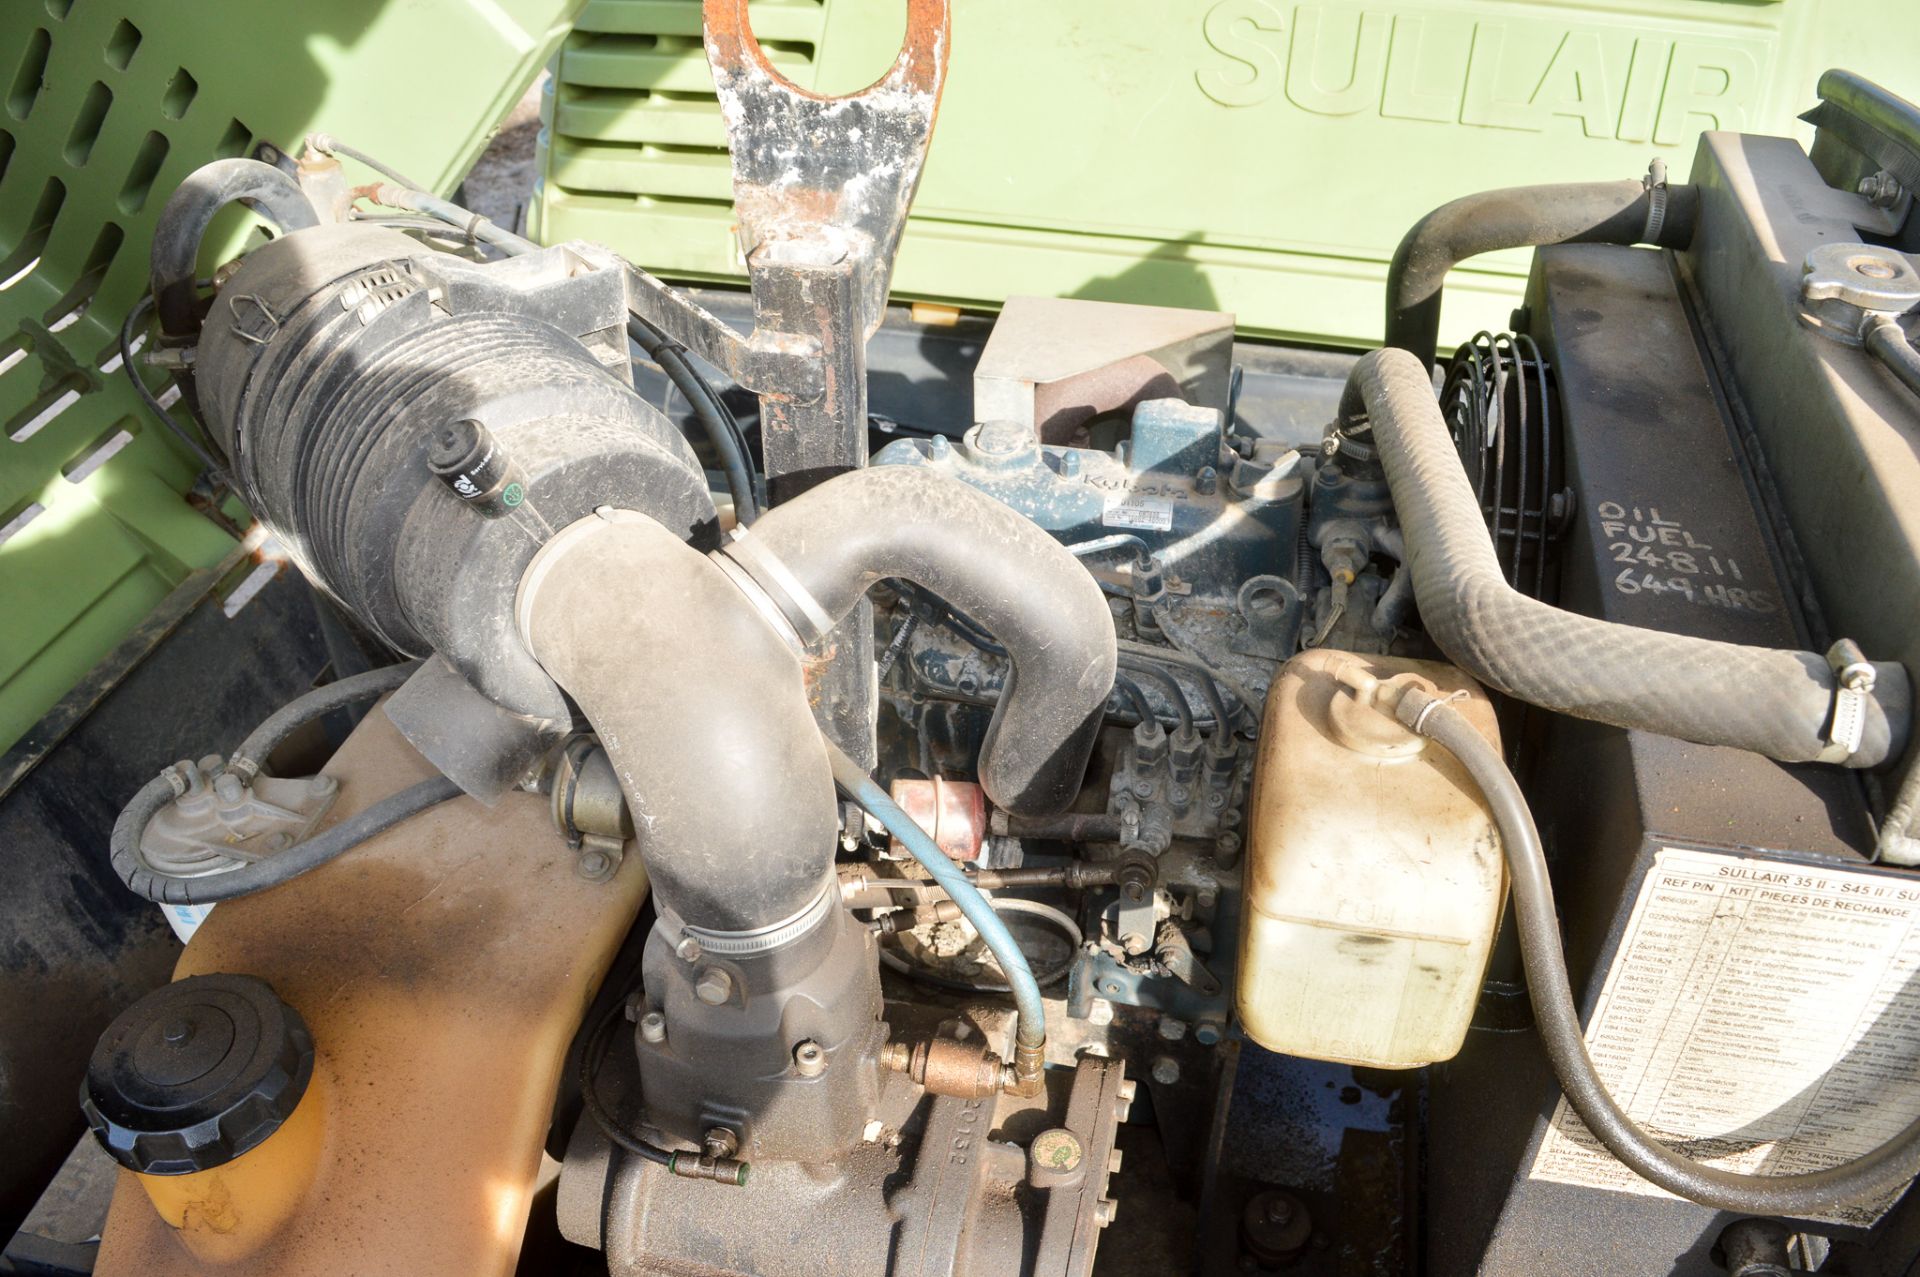 Sullair 48K diesel driven mobile air compressor Year: 2007 S/N: 48899 Recorded Hours: 967 - Image 3 of 3